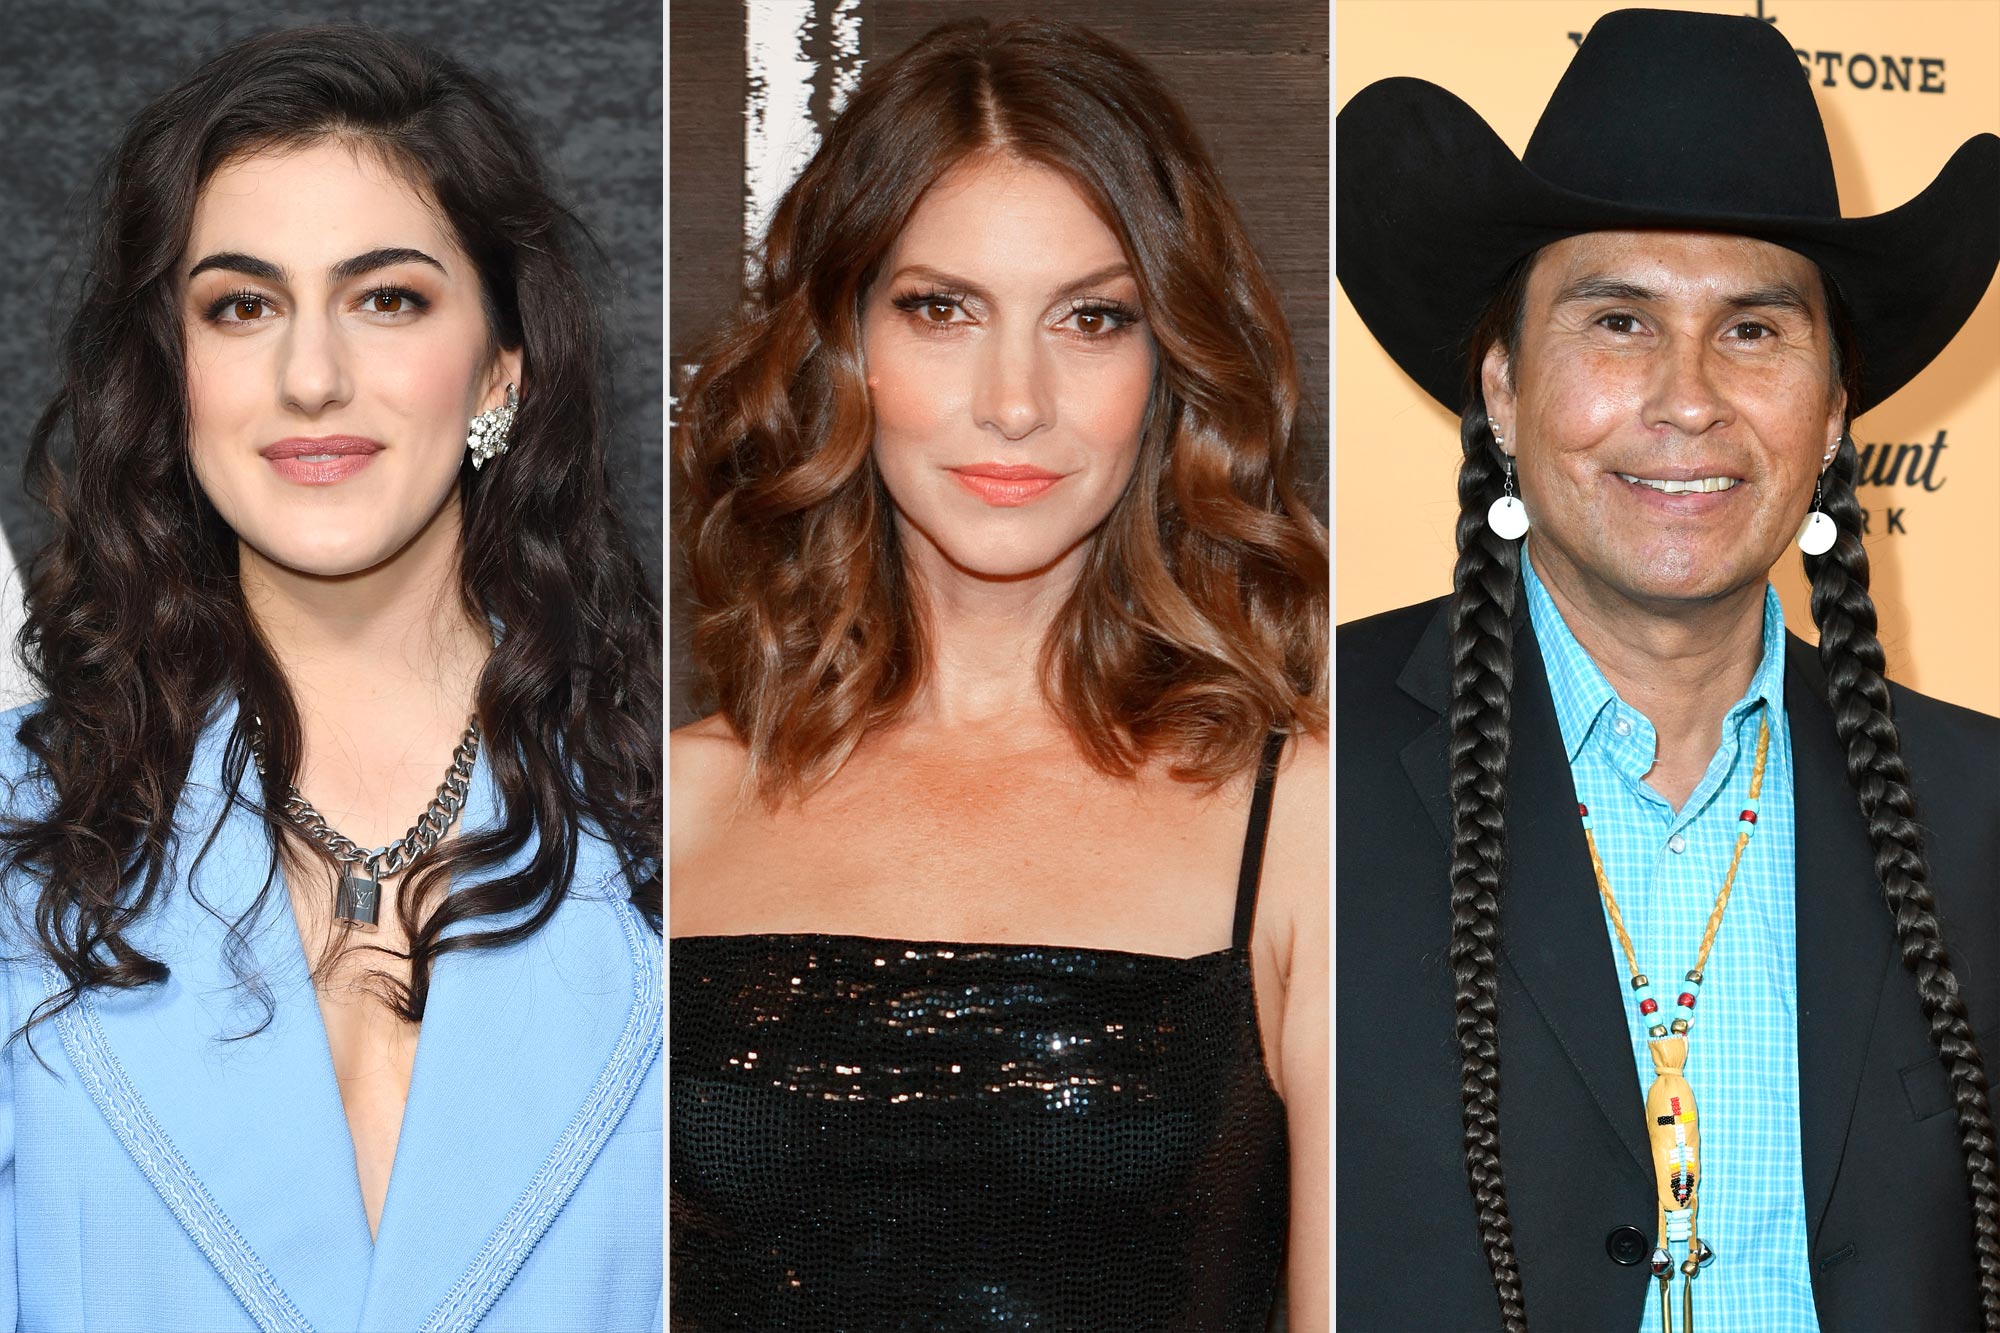 Yellowstone season 5 adds new cast members, promotes fan-favorites to series regulars